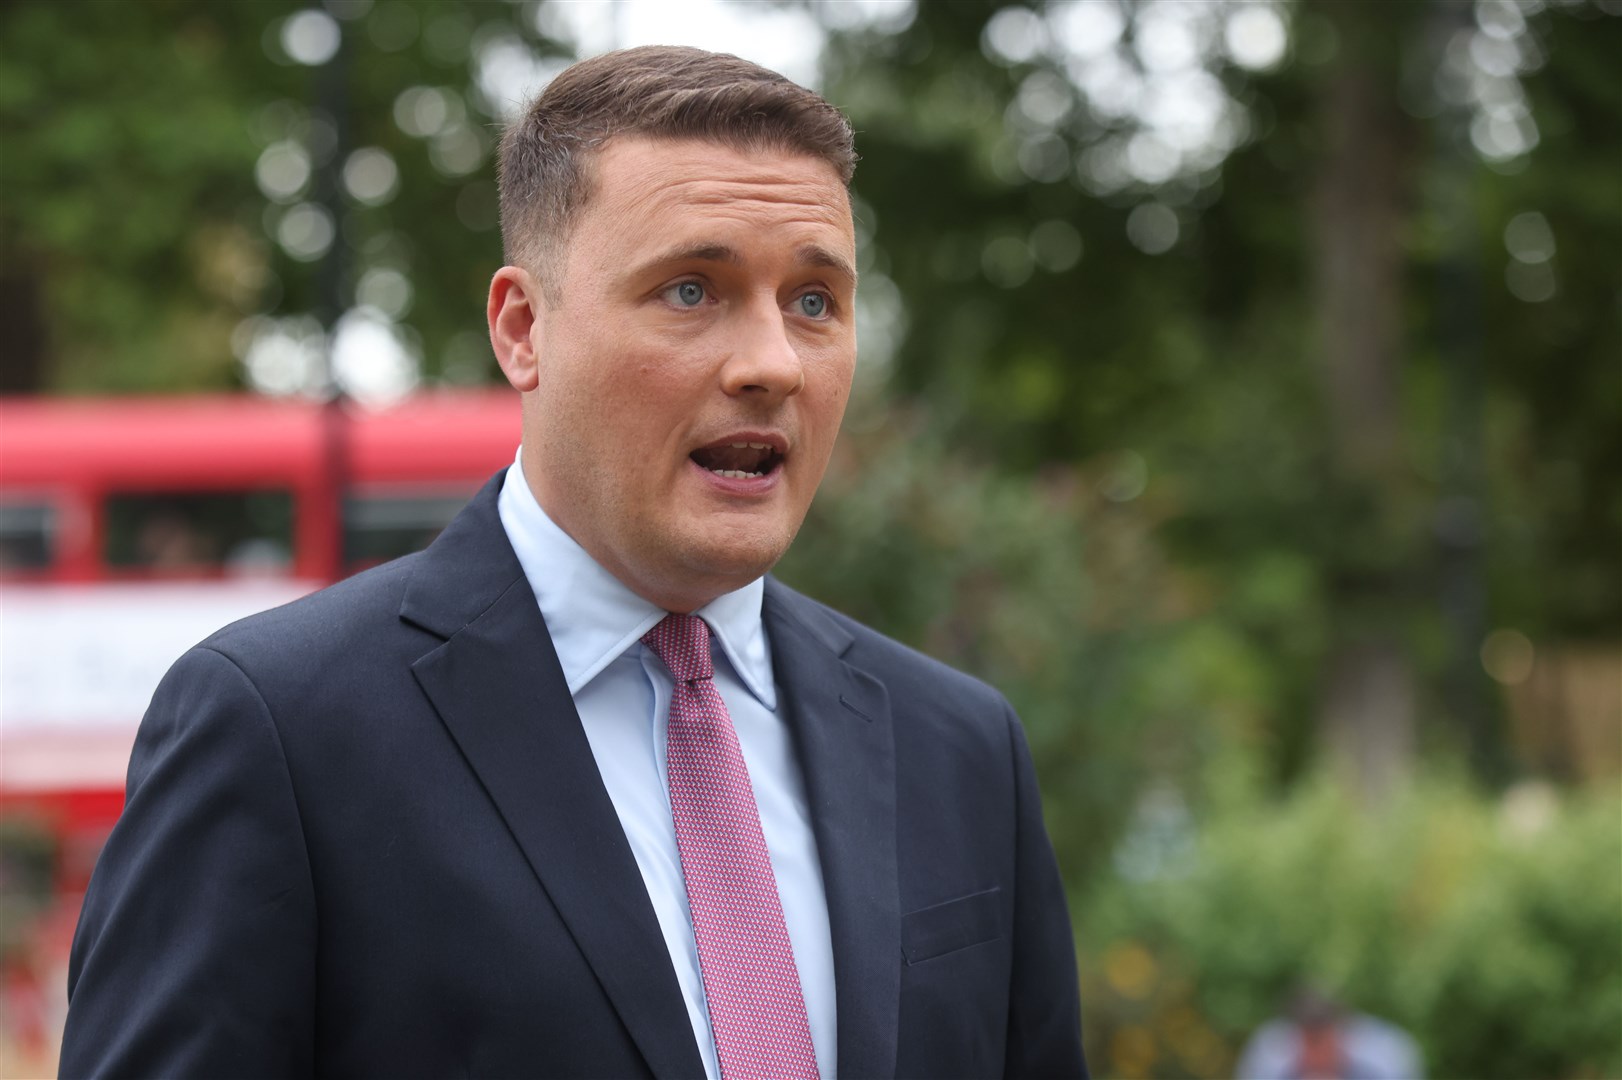 Shadow health secretray Wes Streeting speaking to the media on College Green, outside the Houses of Parliament (James Manning/PA)